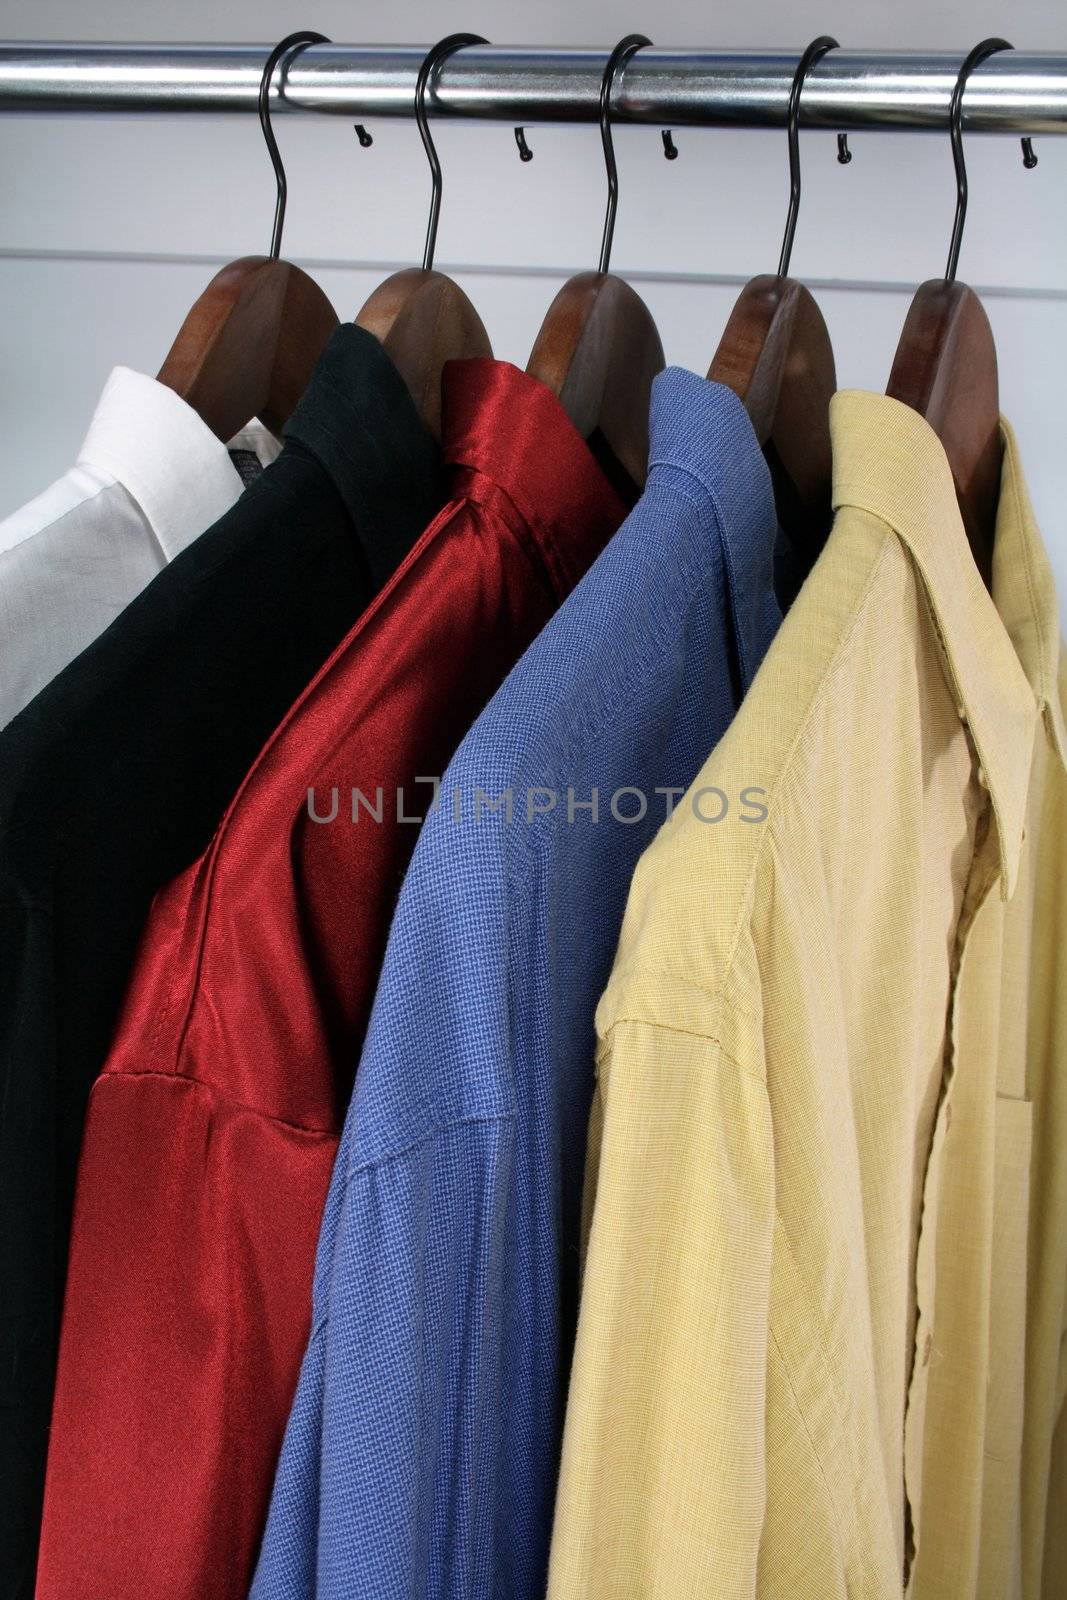 Shirts of different colors on wooden hangers.